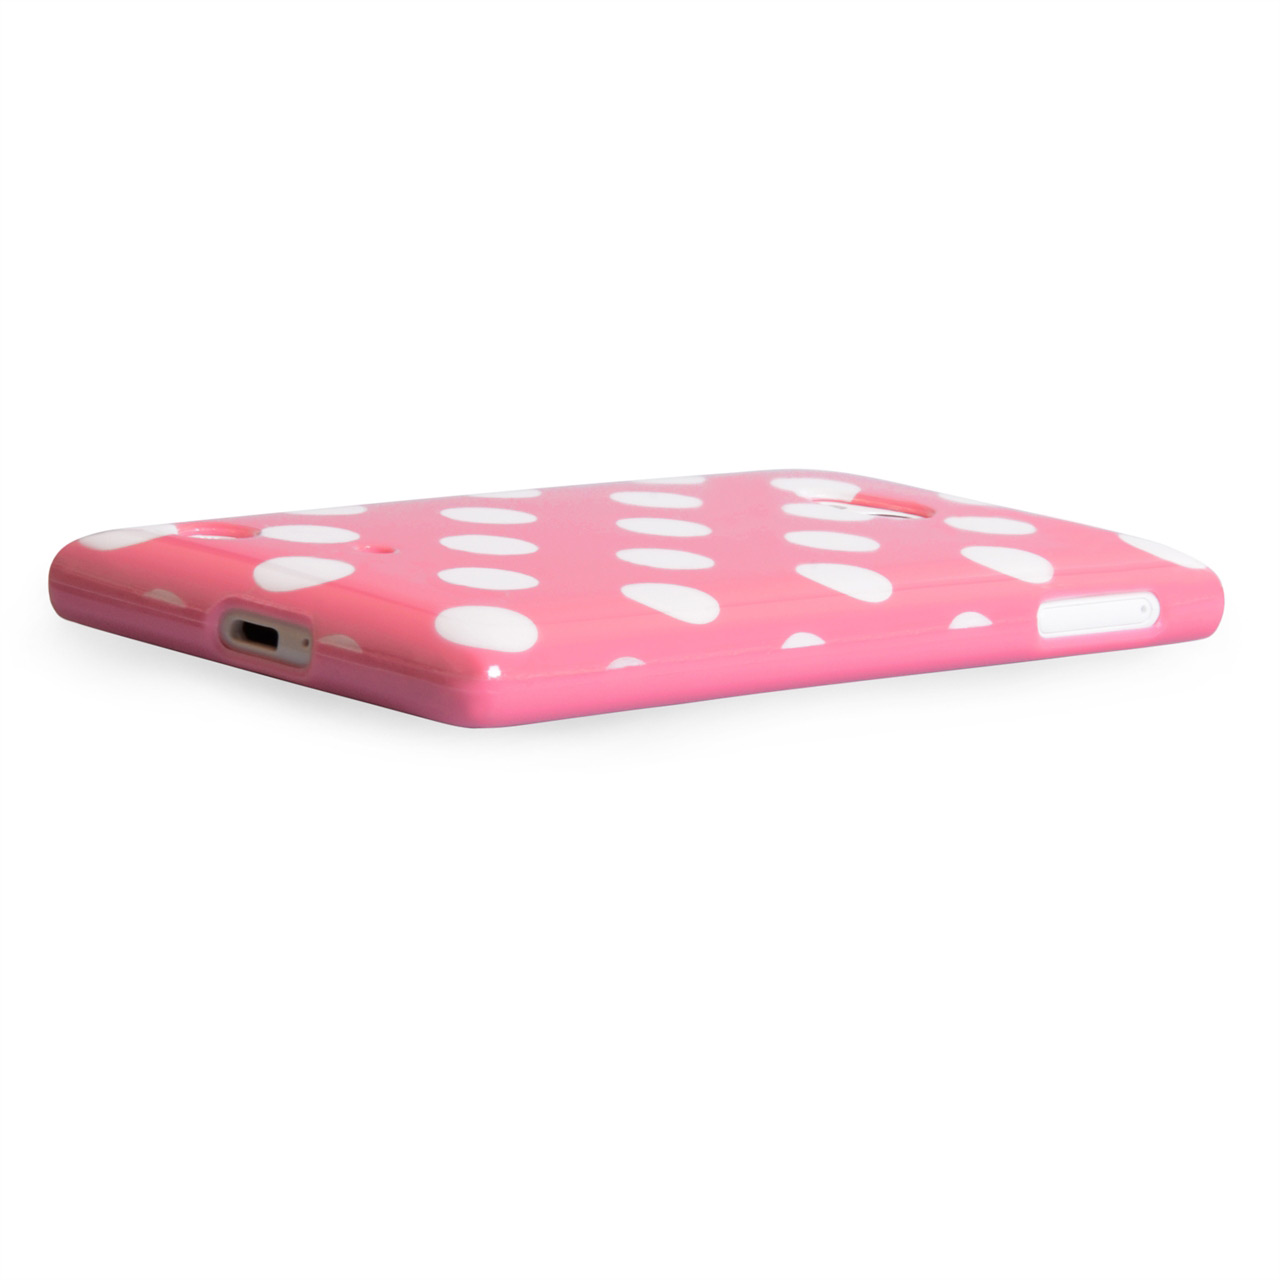 YouSave Accessories Nokia Lumia 720 Polka Dot Case - Baby Pink